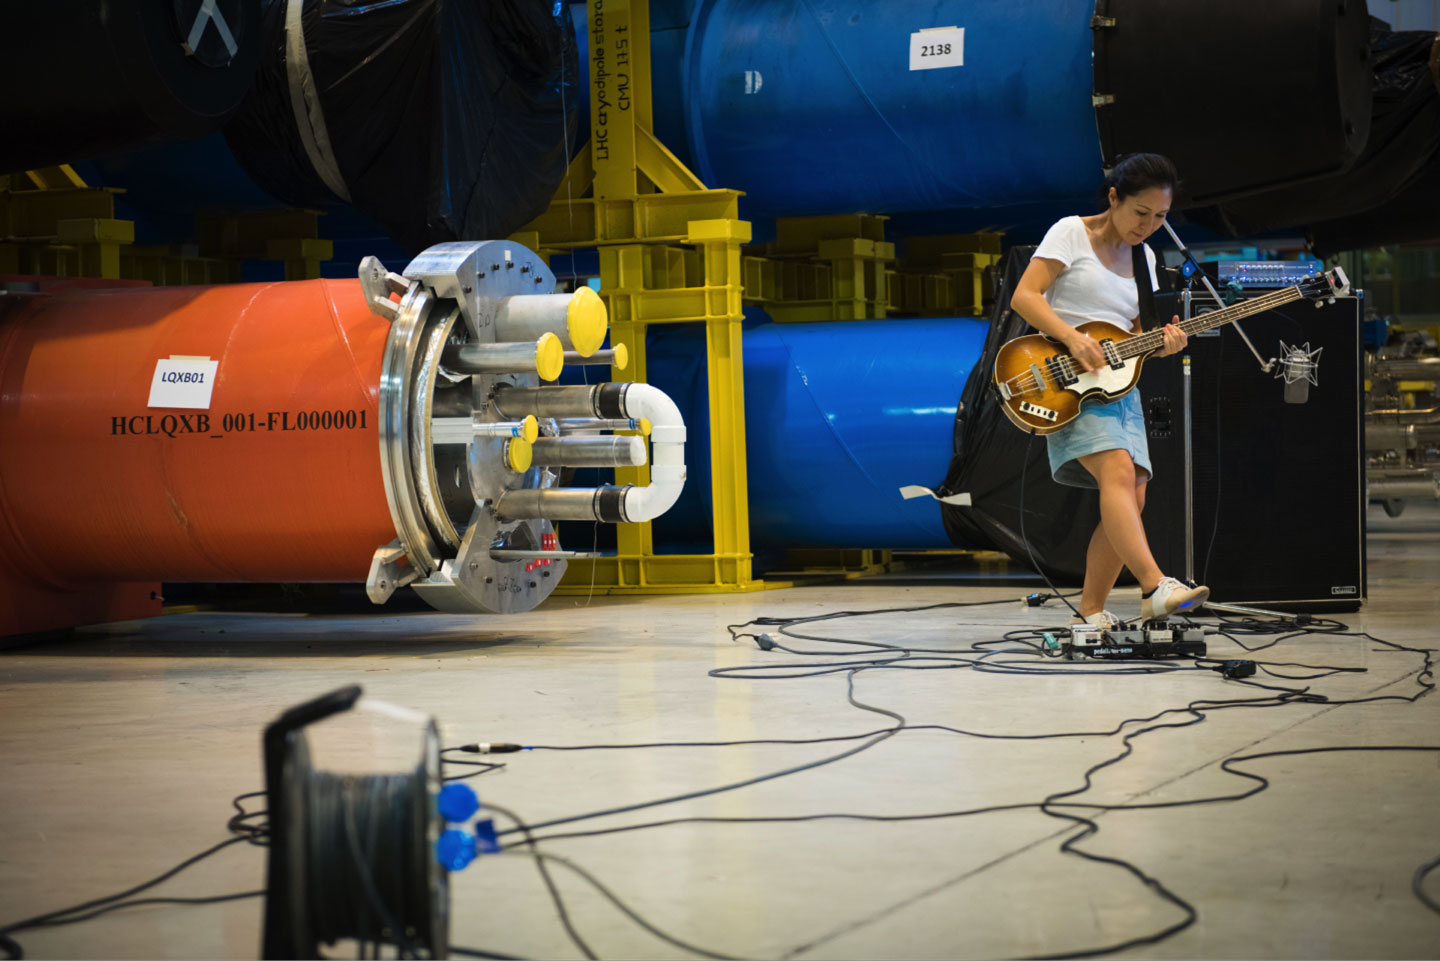 Indie band Deerhoof experiment with sound at CERN